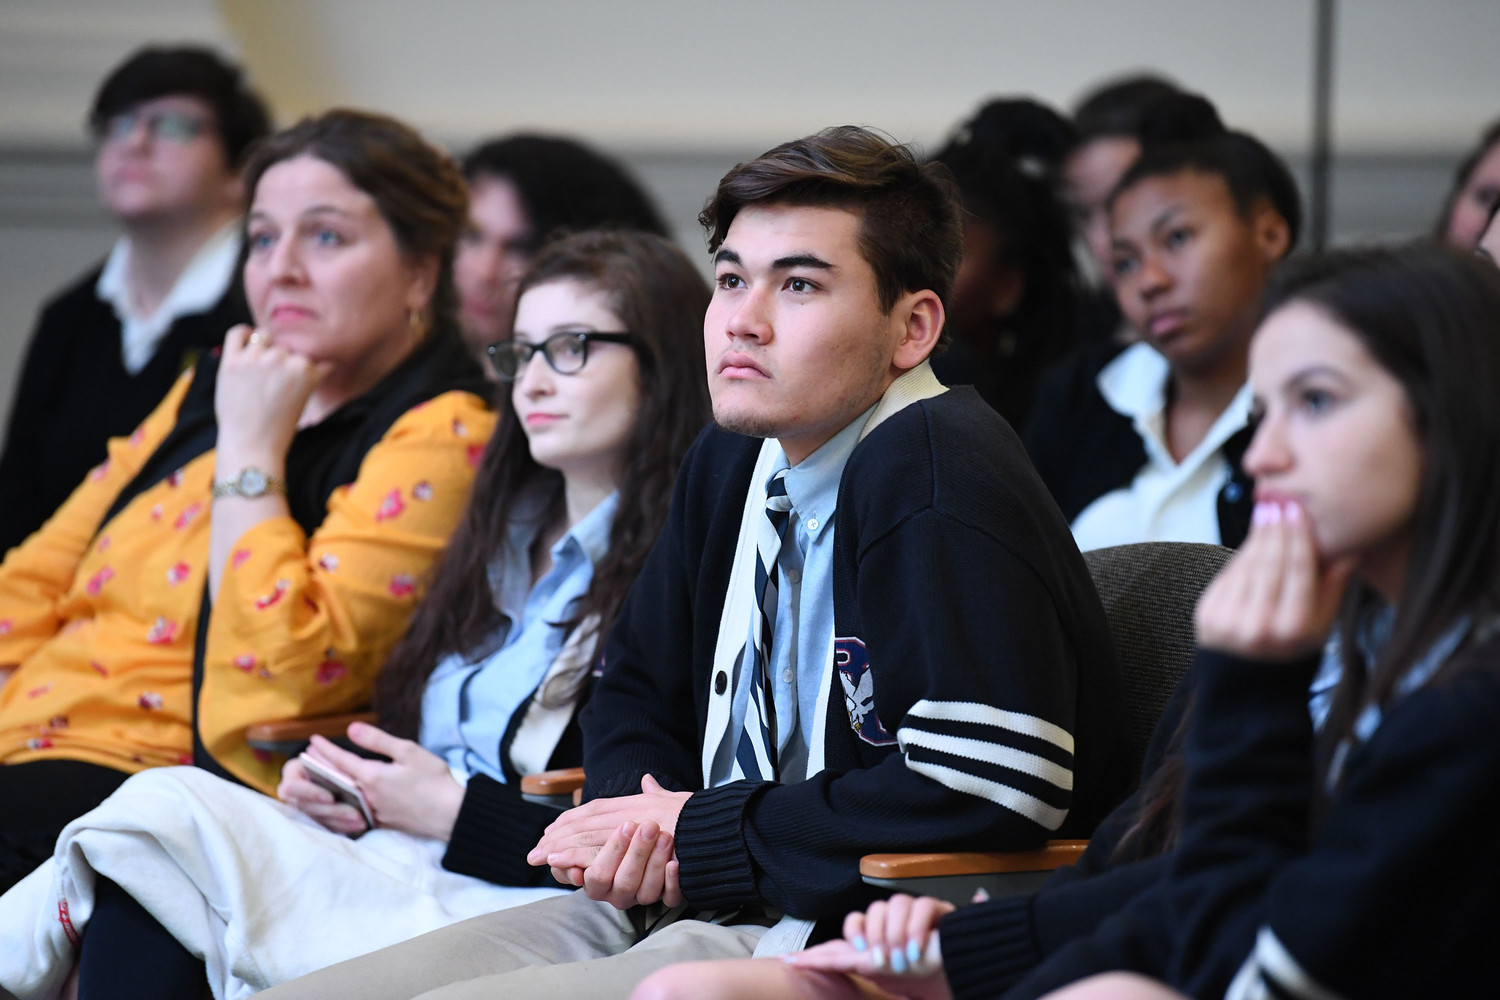 students from John S. Burke Catholic High School in Goshen listen to the panel during the second annual Catholic Leadership Conference at the Sheen Center for Thought & Culture in lower Manhattan March 5.